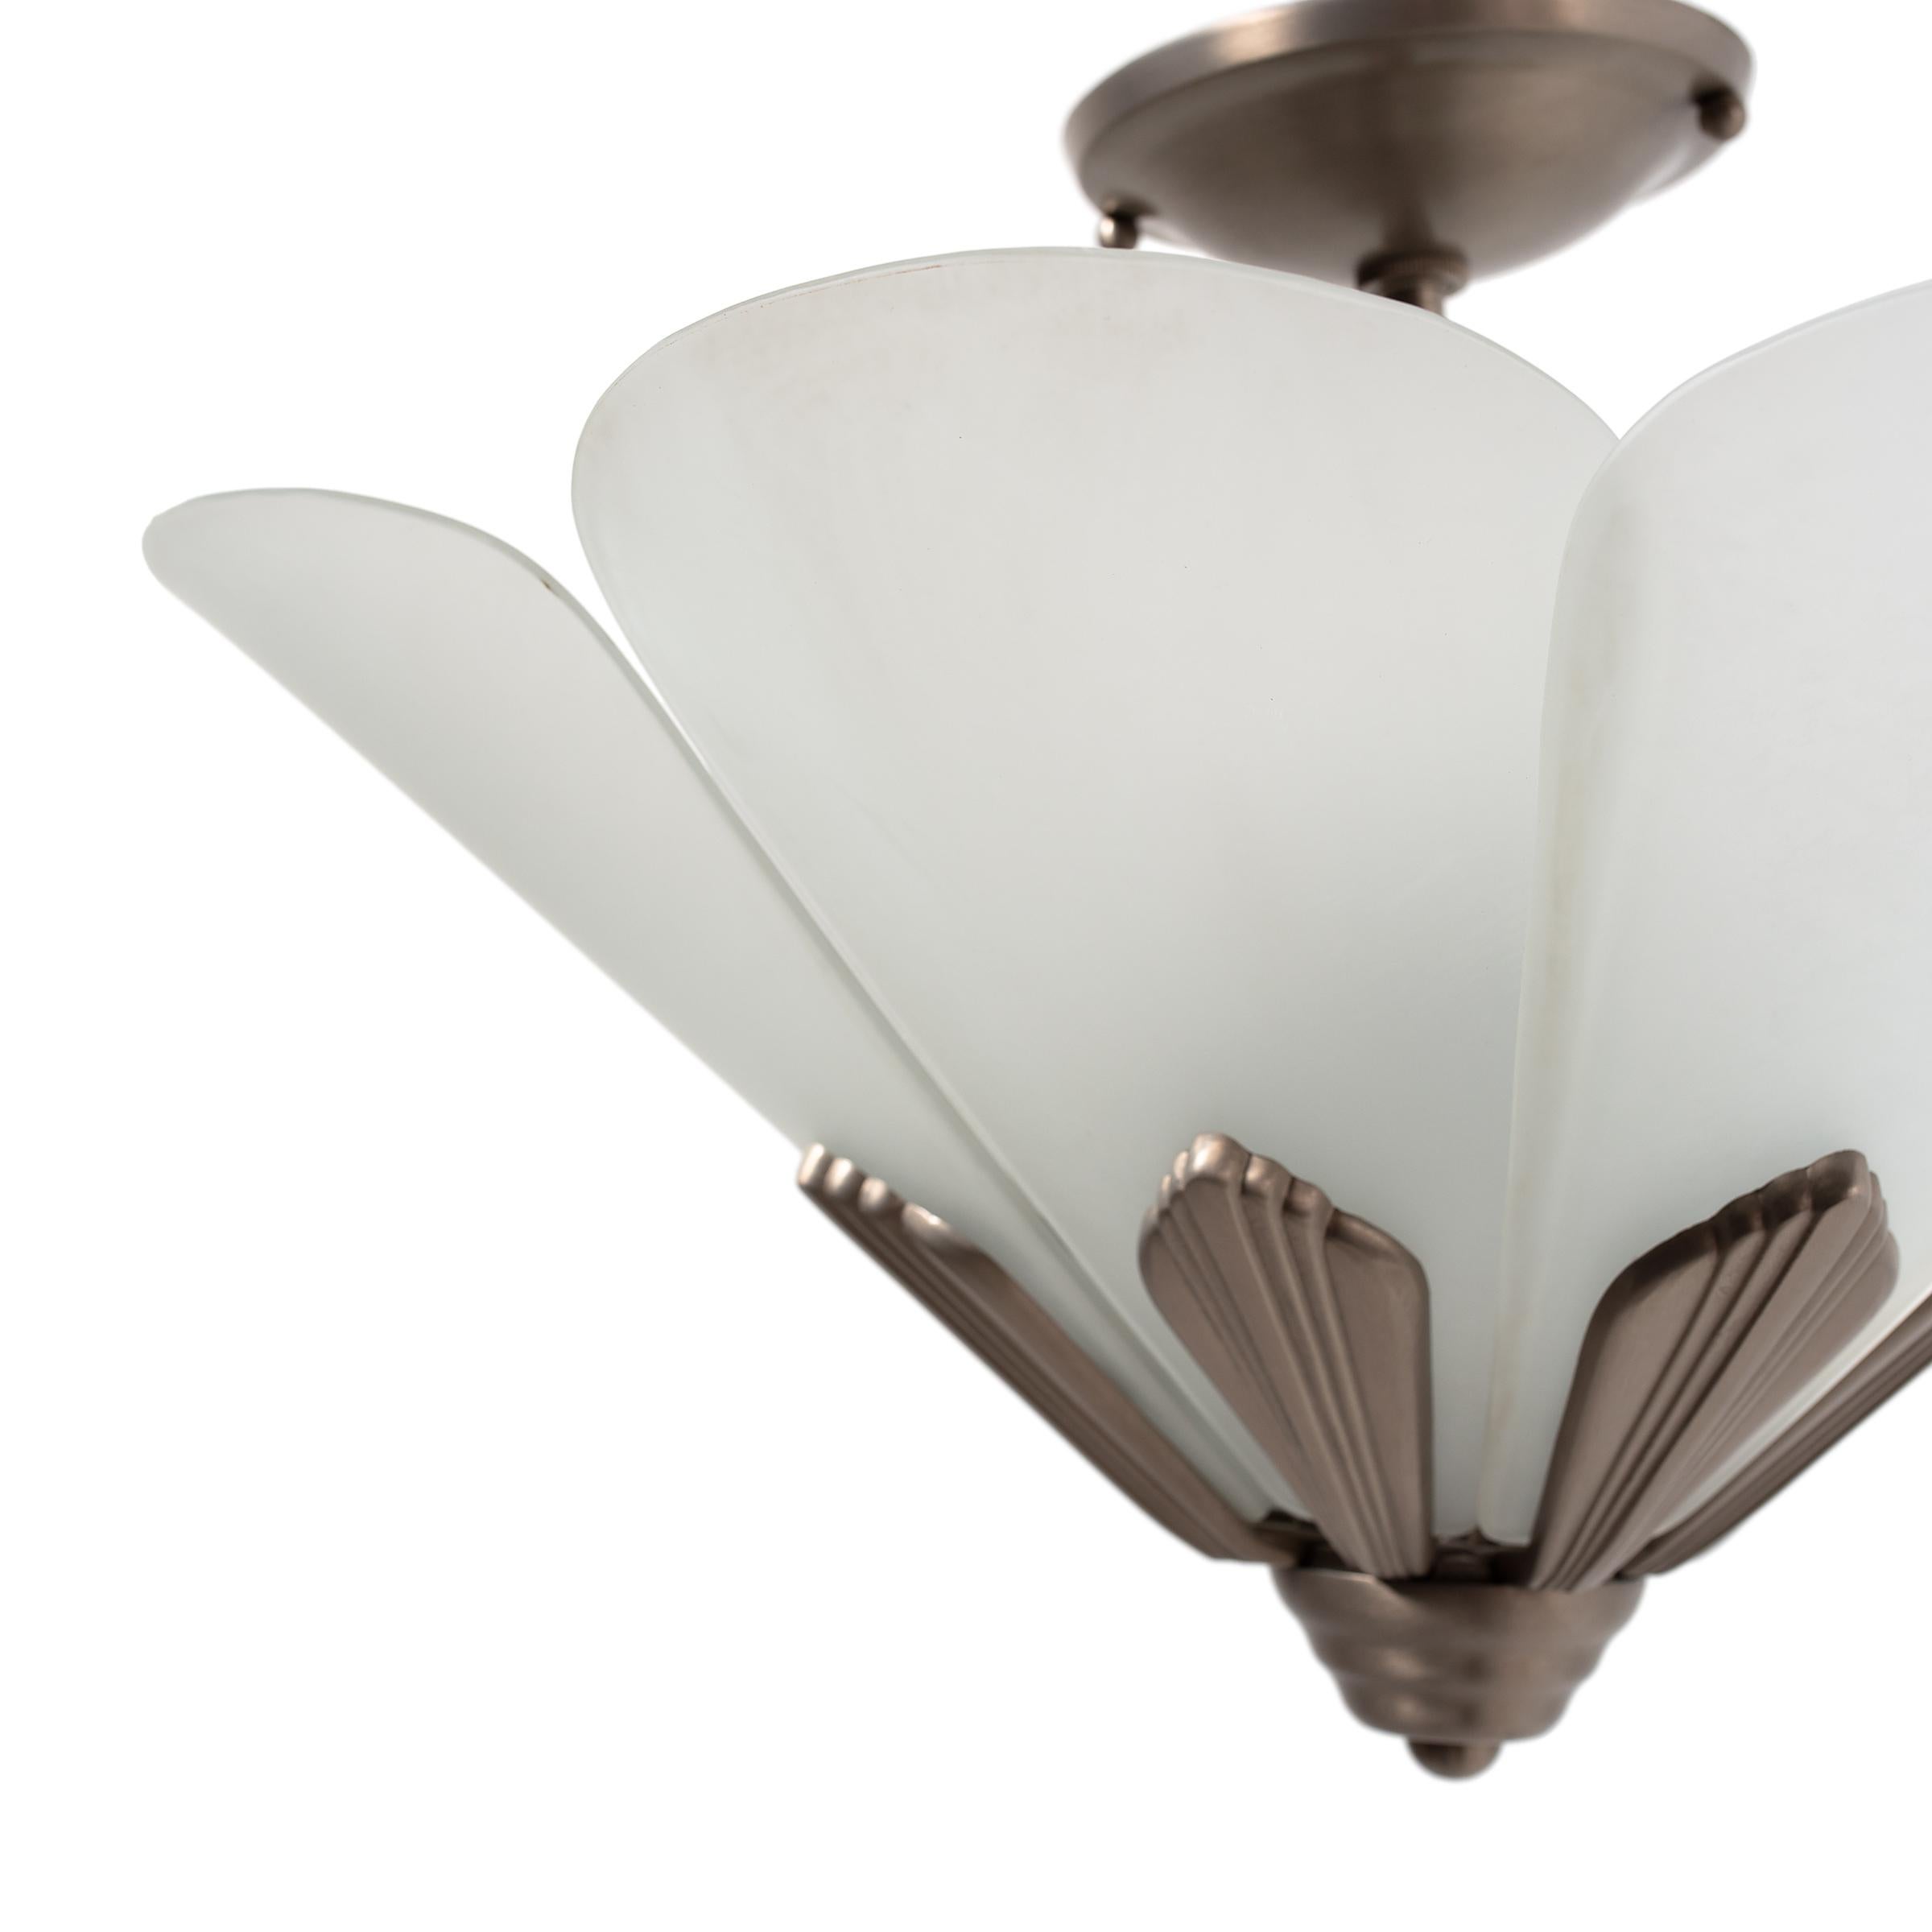 This refined frosted glass pendant light combines bold geometric metalwork with the soft refinement of French Art Deco art glass. The fixture has a conical, tapered form comprised of petal-form frosted glass shades seated in a nickel-plated bronze